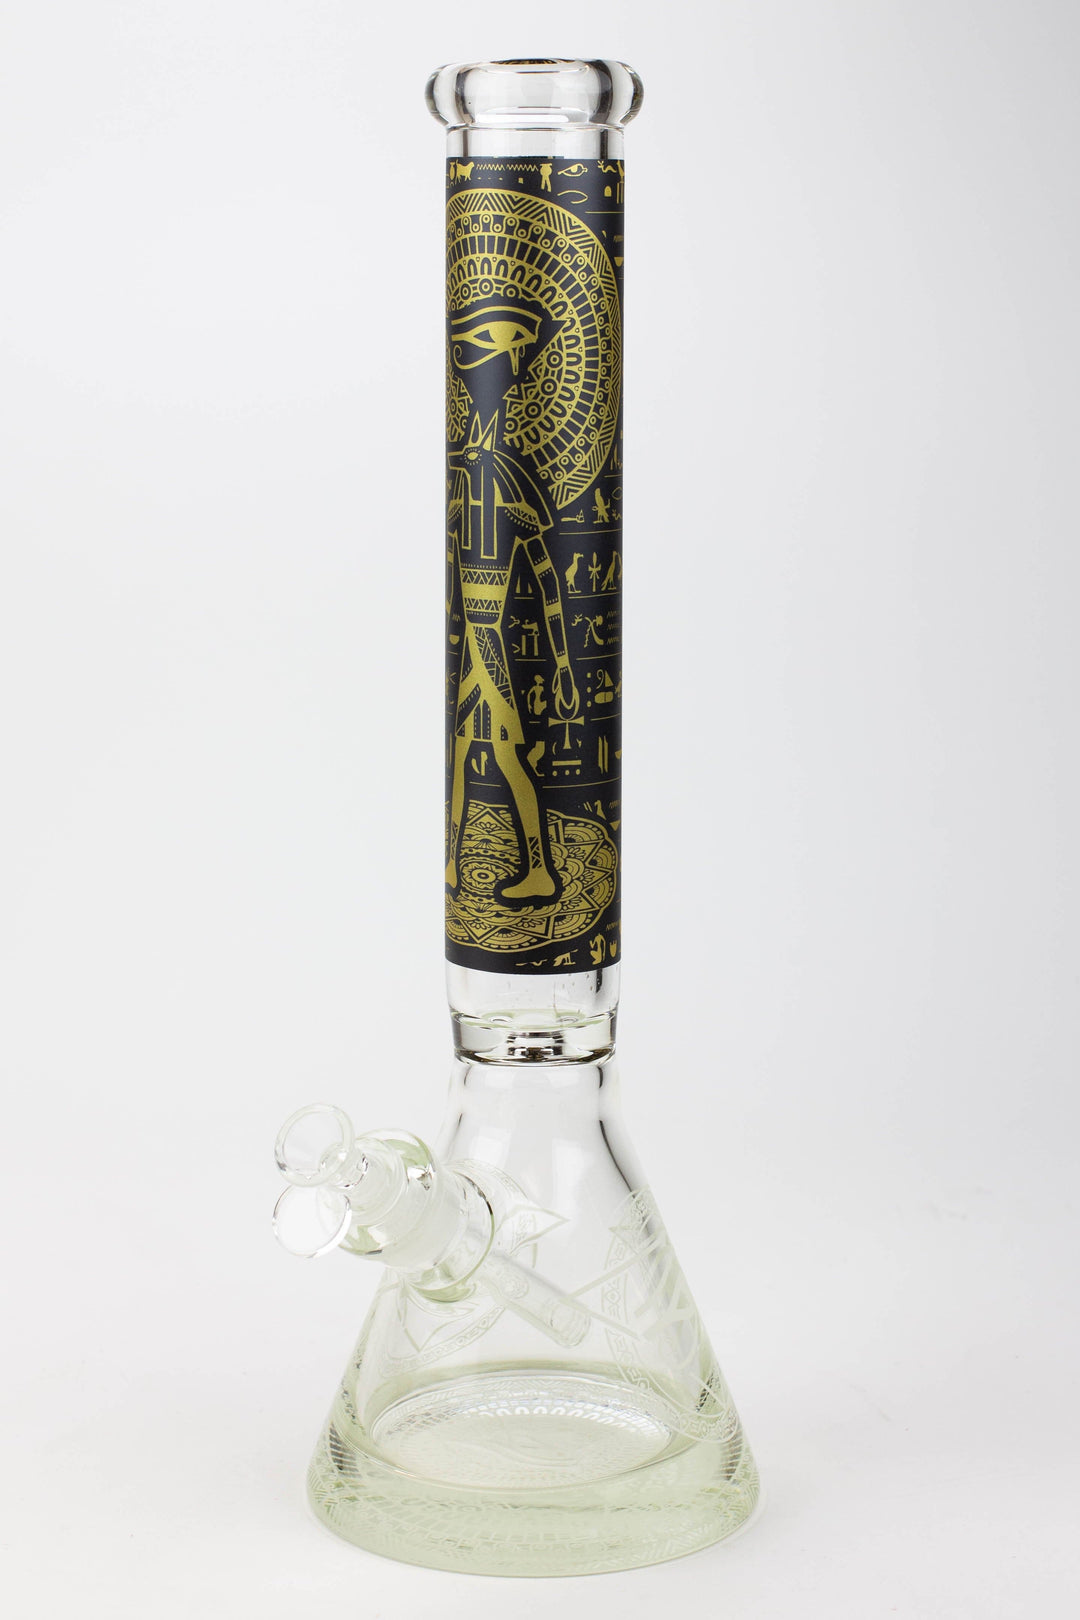 Egyptian hieroglyph 9 mm glow in the dark glass pipes_20